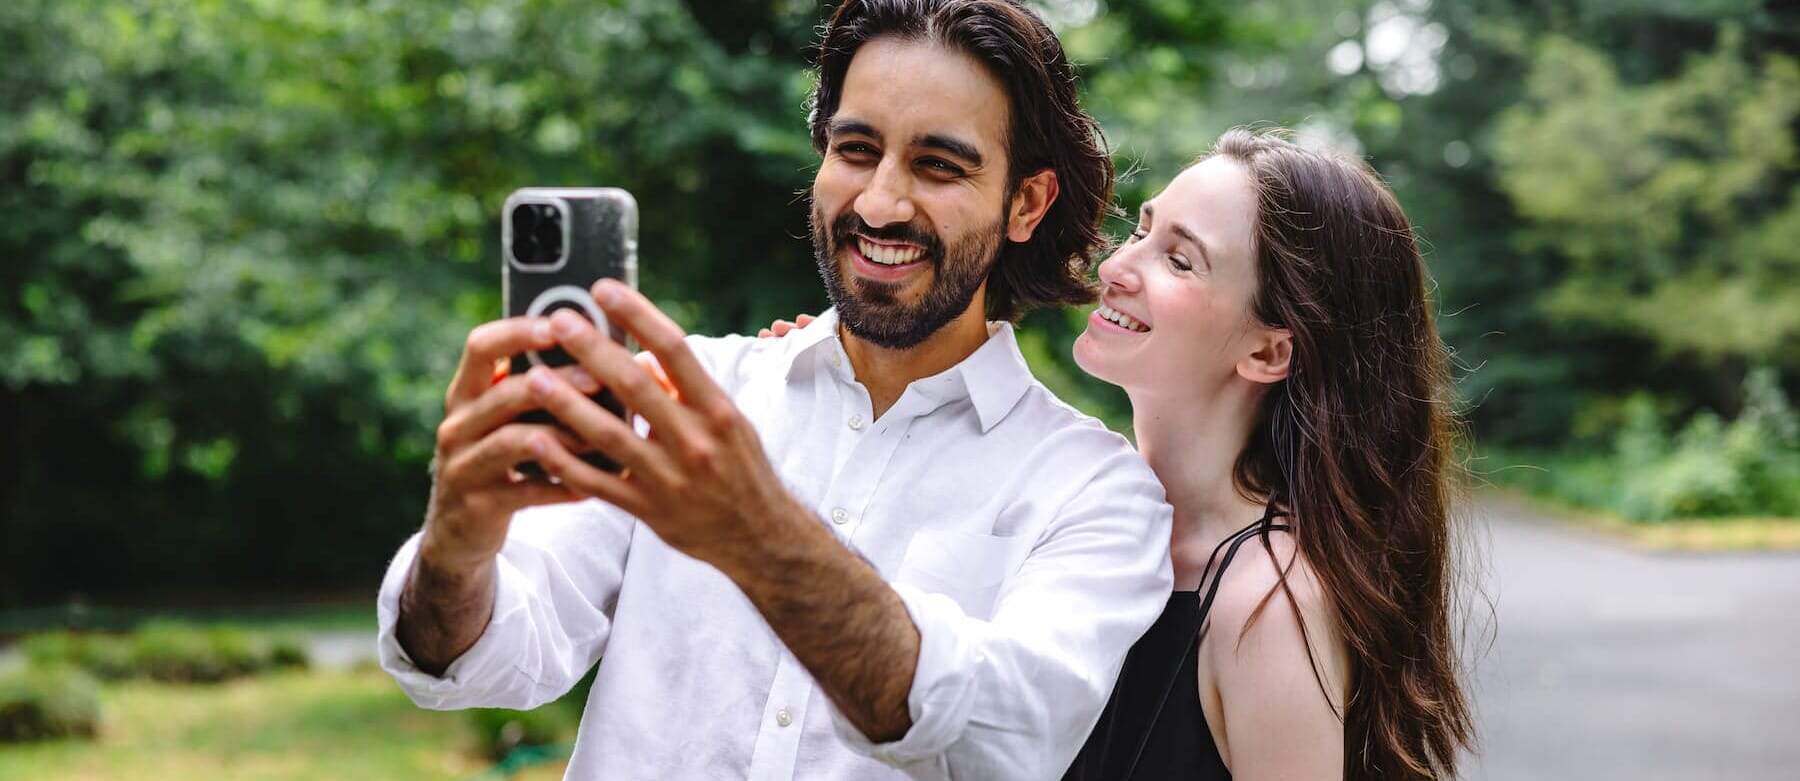 how to take a good selfie photographer flytographer 2